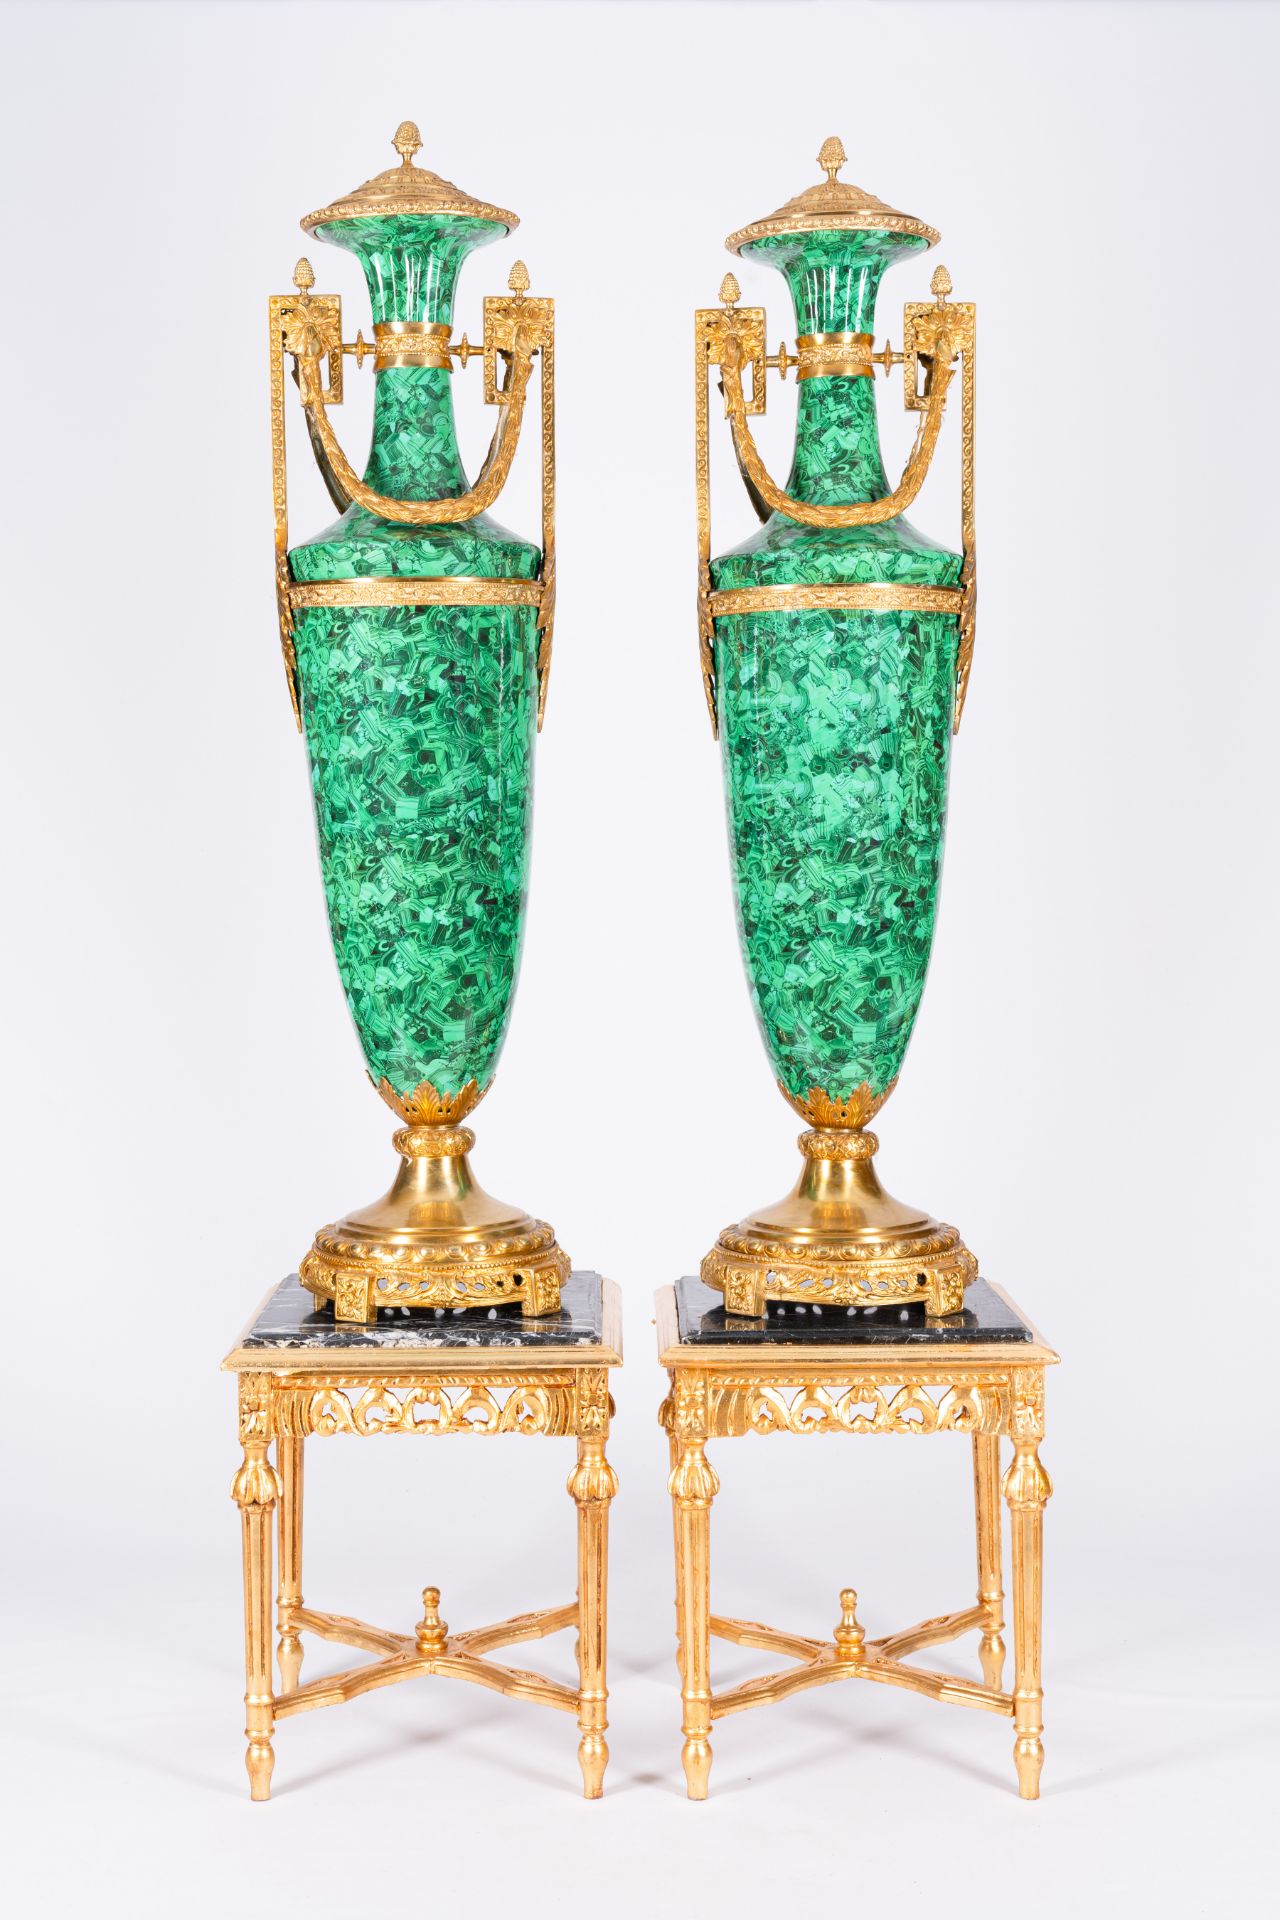 A pair of large gilt bronze mounted faux-malachite vases on matching gilt wood bases with marble top